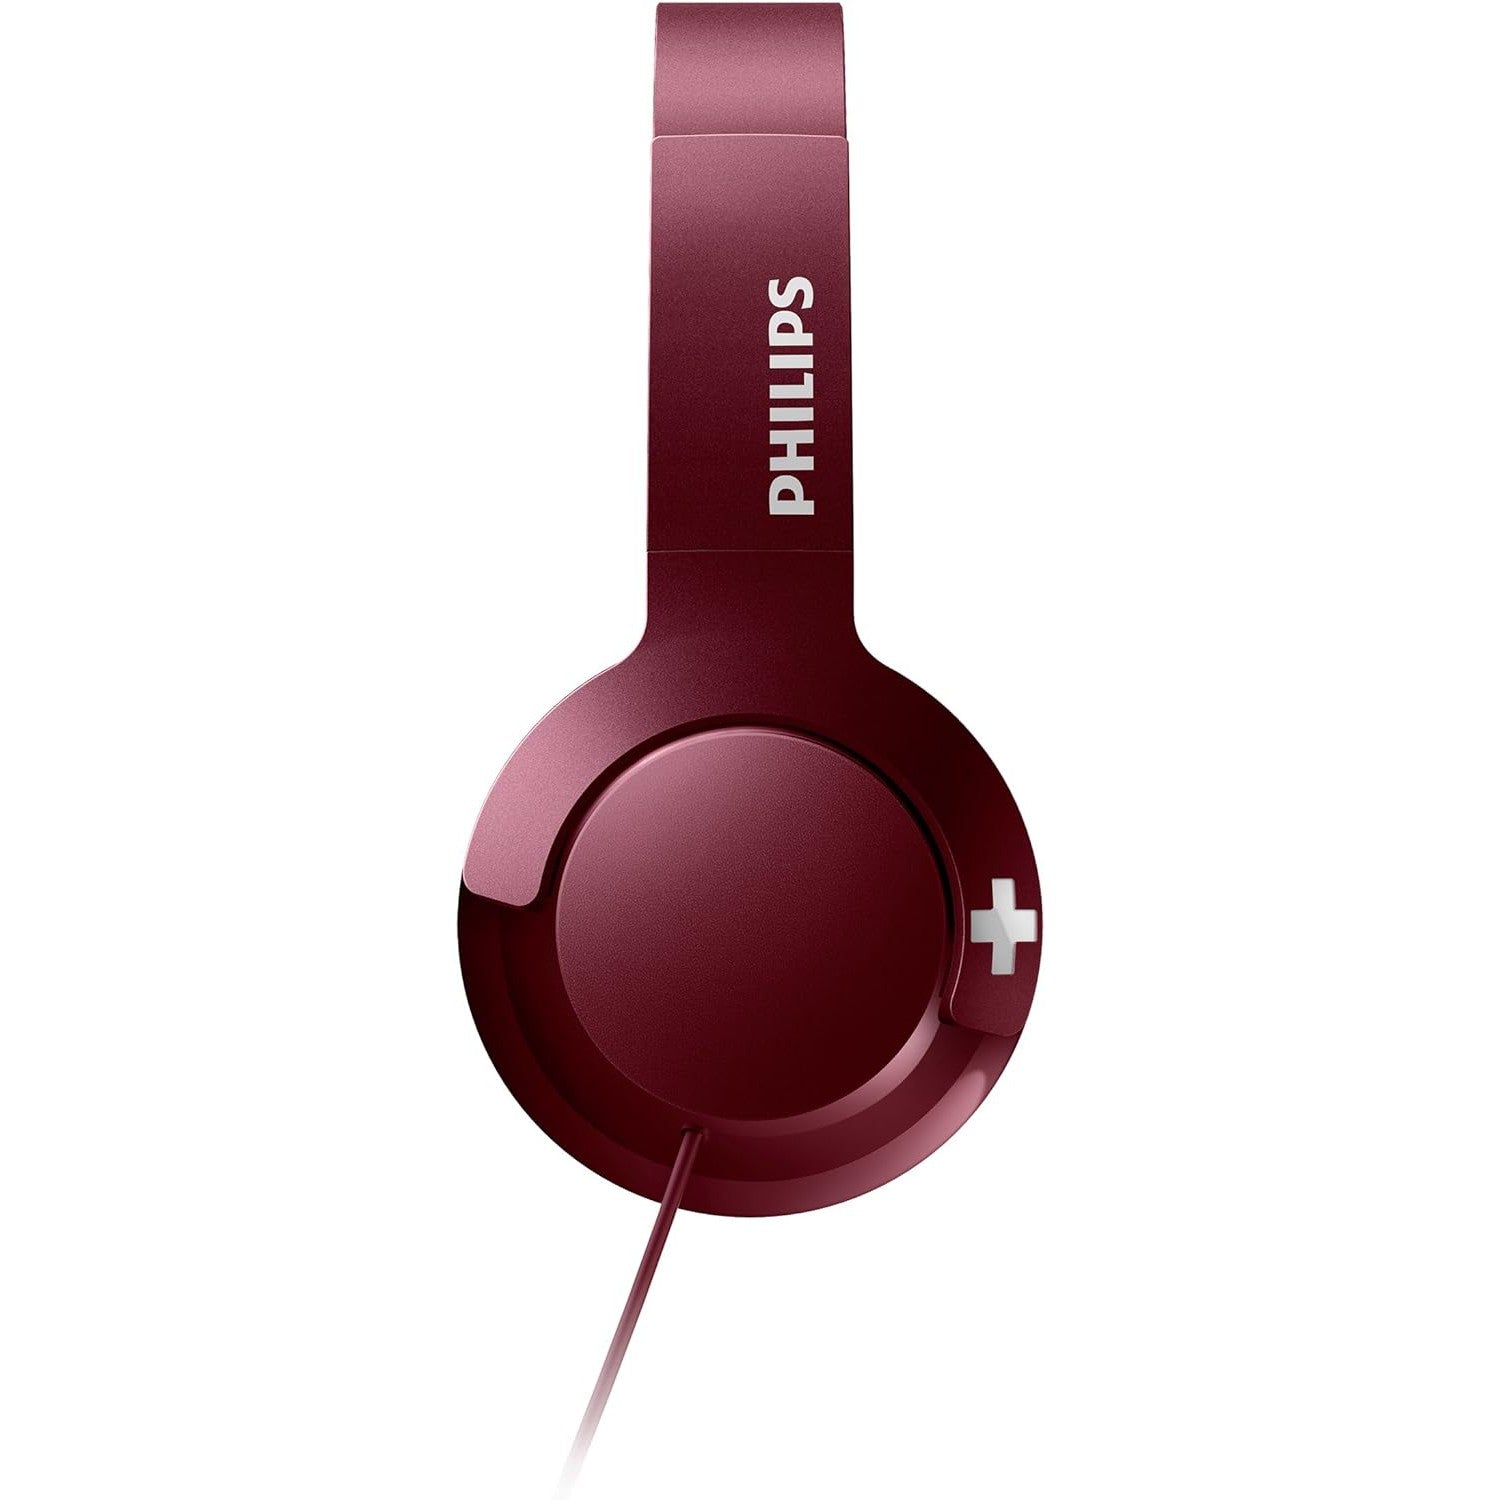 PHILIPS Audio SHL3075RD BASS+ On-Ear Headphones with Mic (Sound Isolation, Flat Folding) - Red,Adjustable